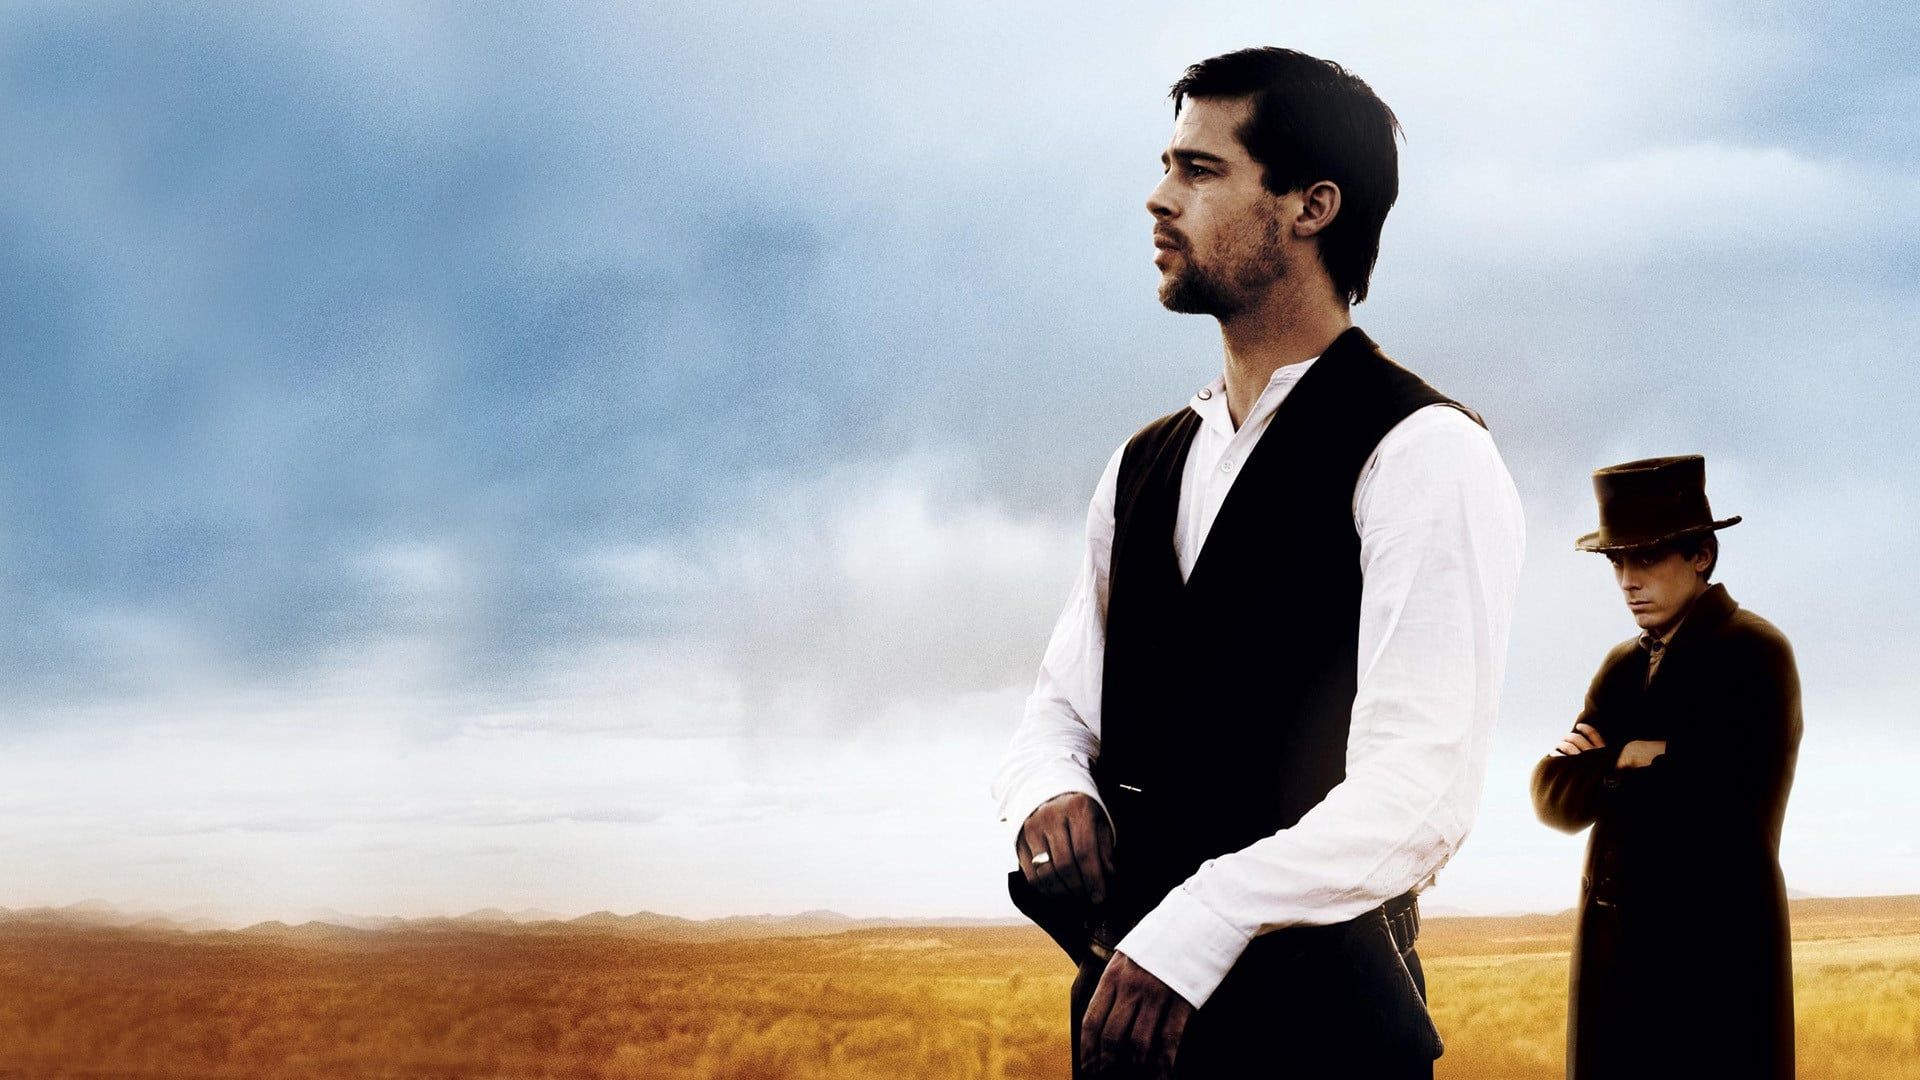 The Assassination of Jesse James by the Coward Robert Ford Backdrop